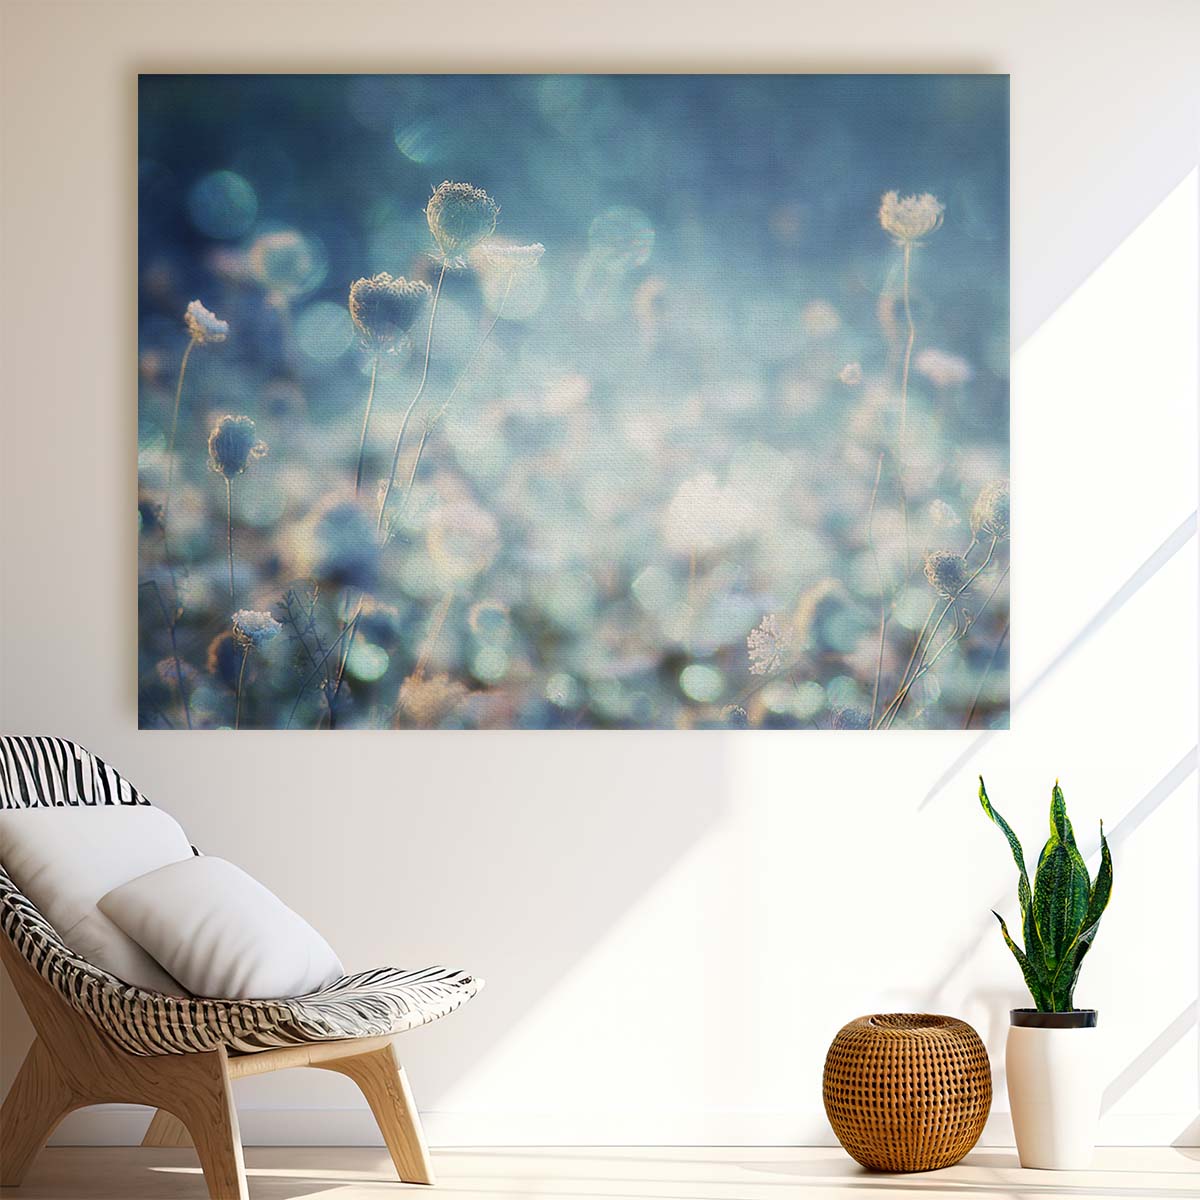 Turquoise Pastel Macro Dandelion Flora Wall Art by Luxuriance Designs. Made in USA.